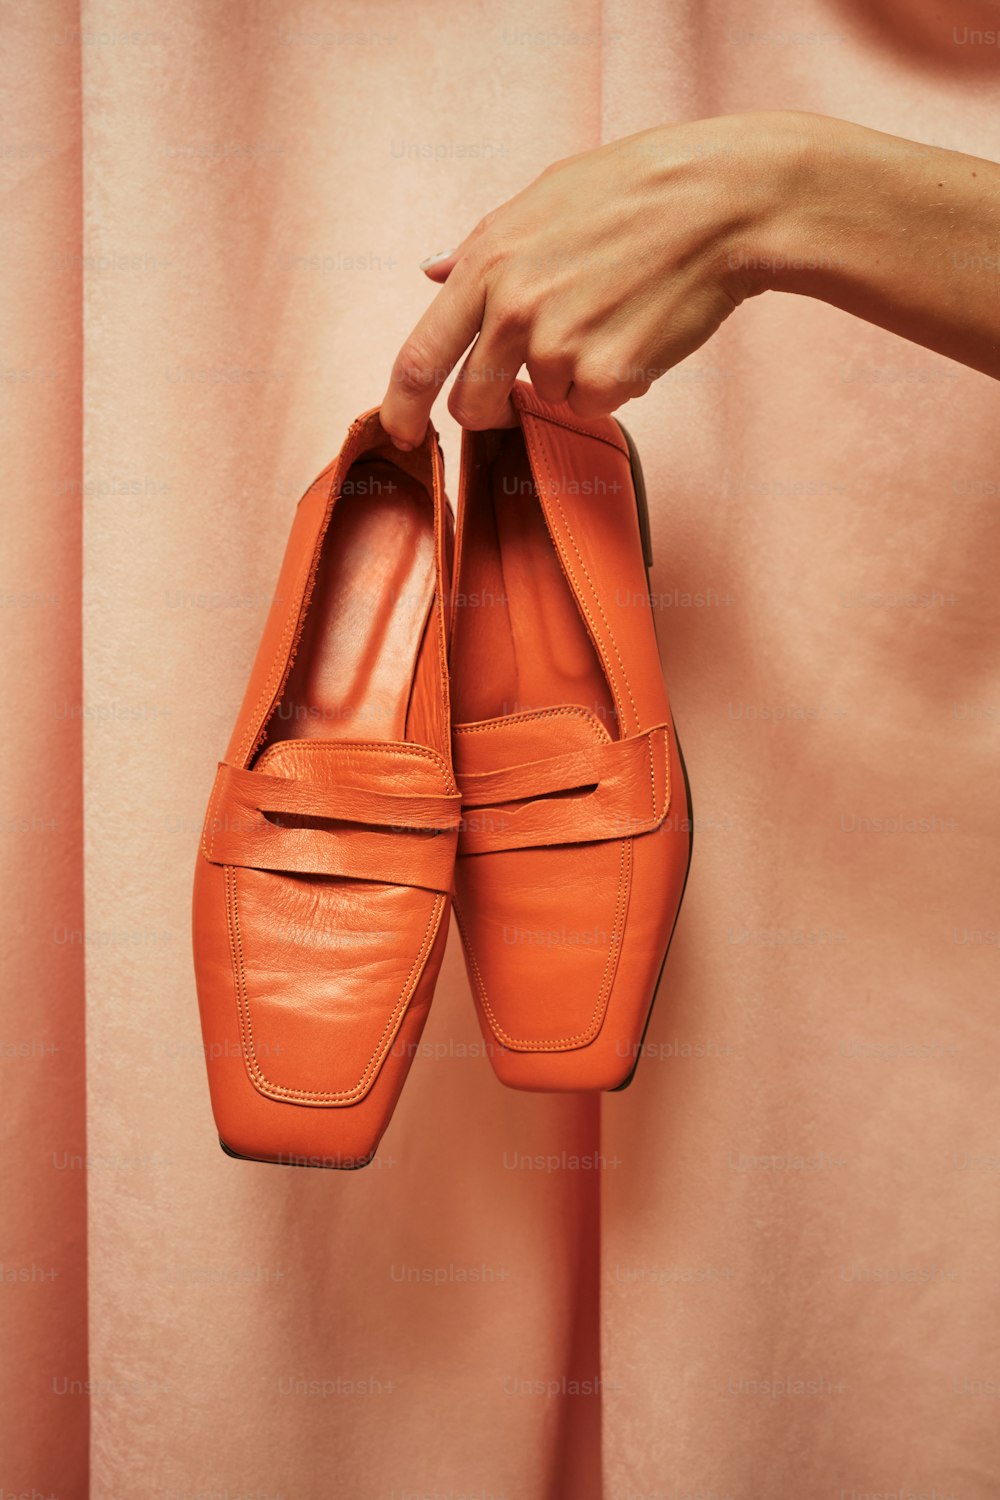 a person holding a pair of orange shoes